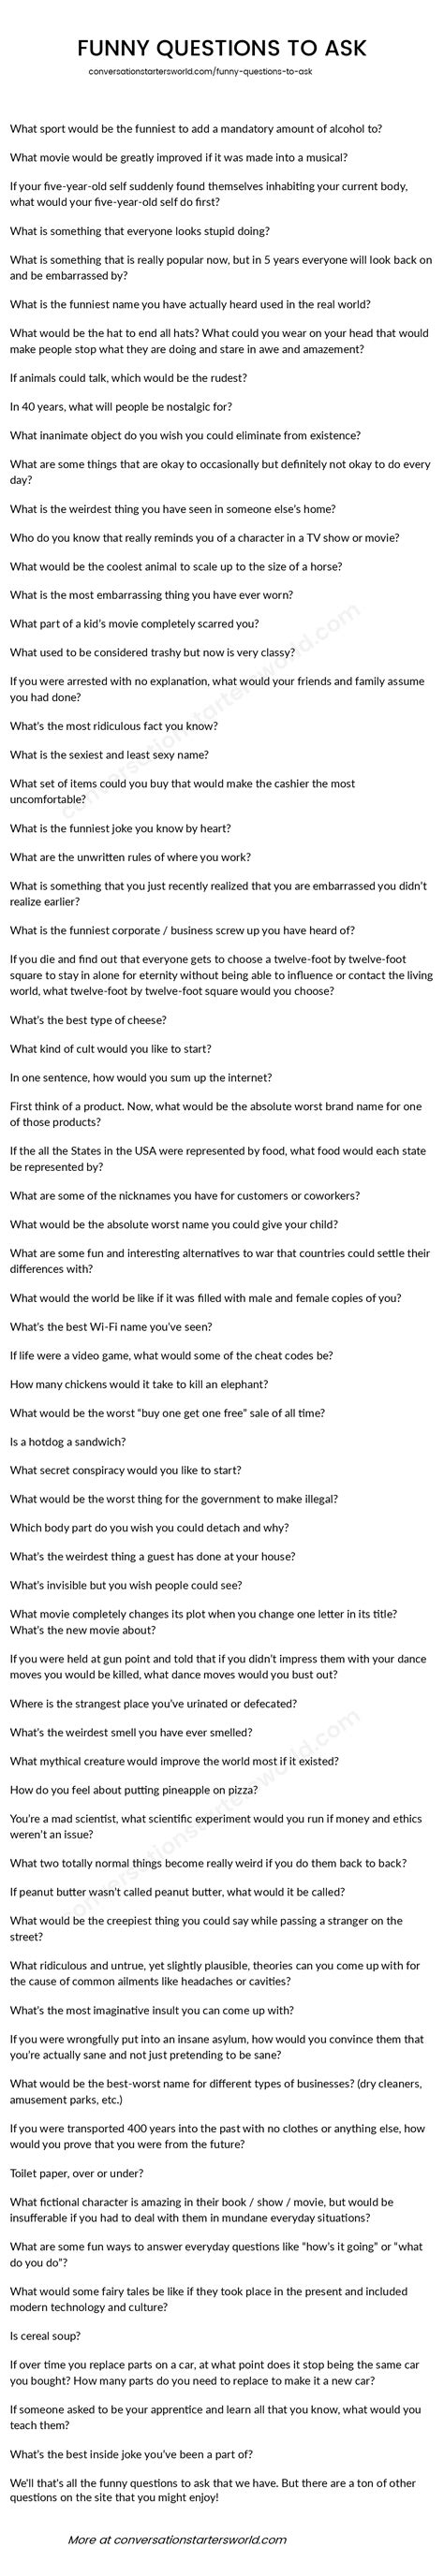 Funny Questions To Ask Get Ready For A Hilarious Conversation